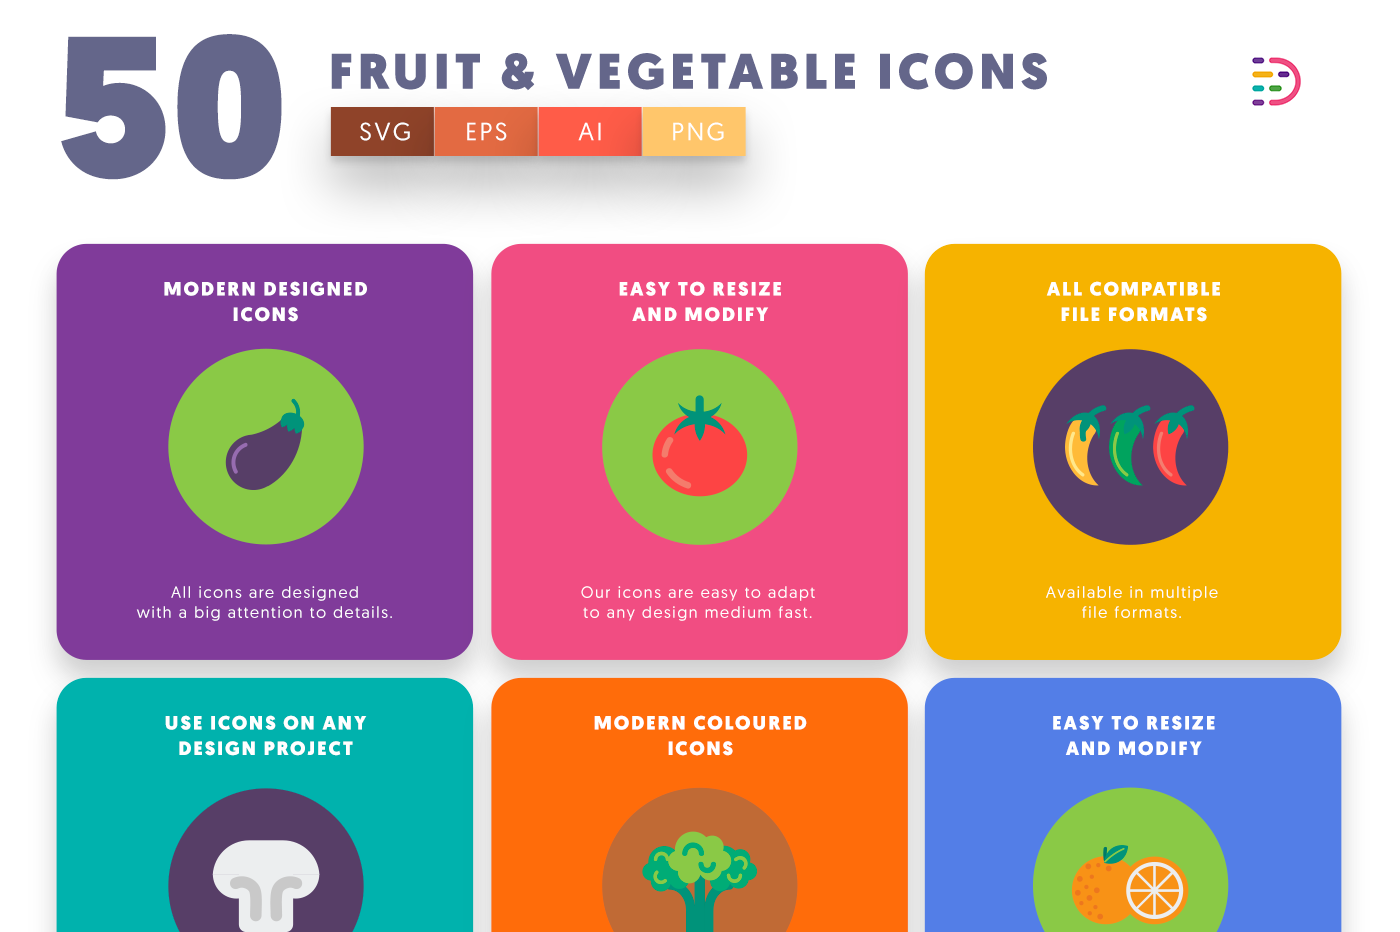 50 Fruits & Vegetable Icons with colored backgrounds